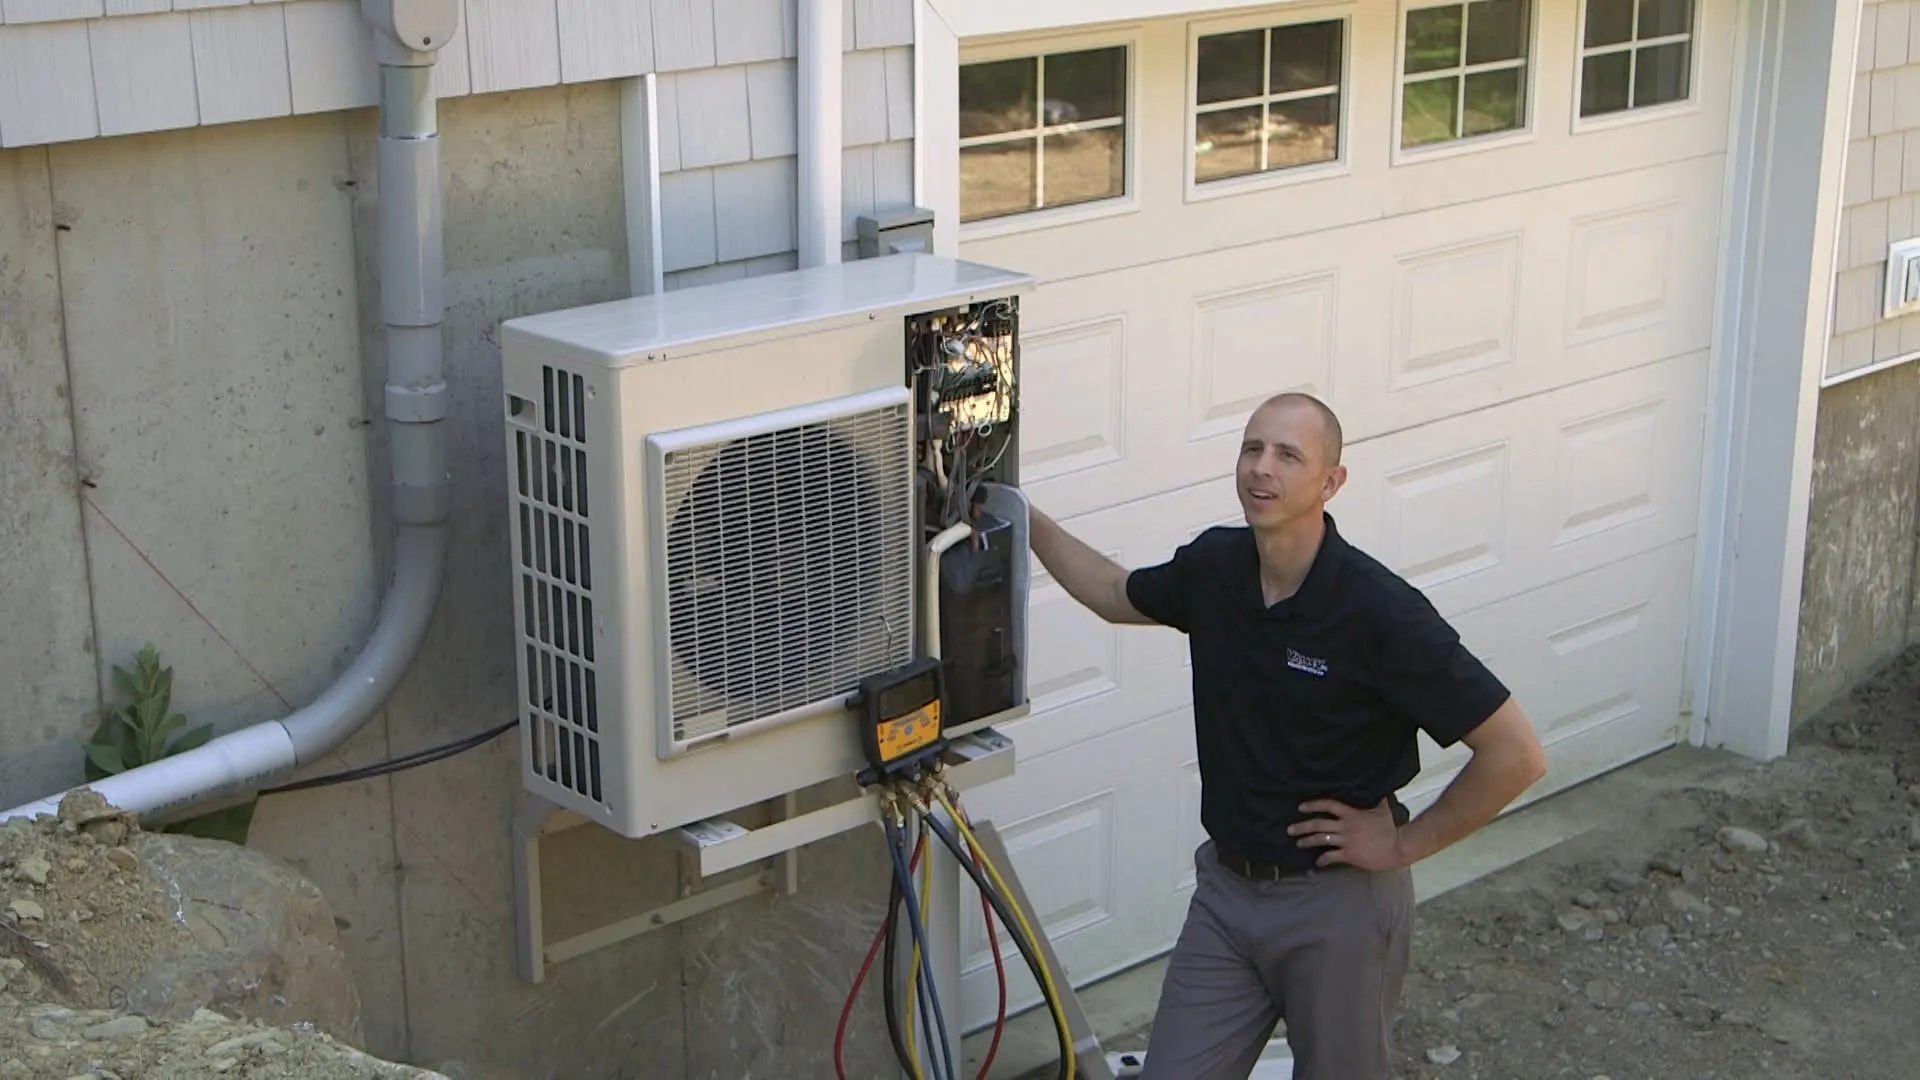 Valley Home Services technician mounting the ductless mini-split outdoor condenser